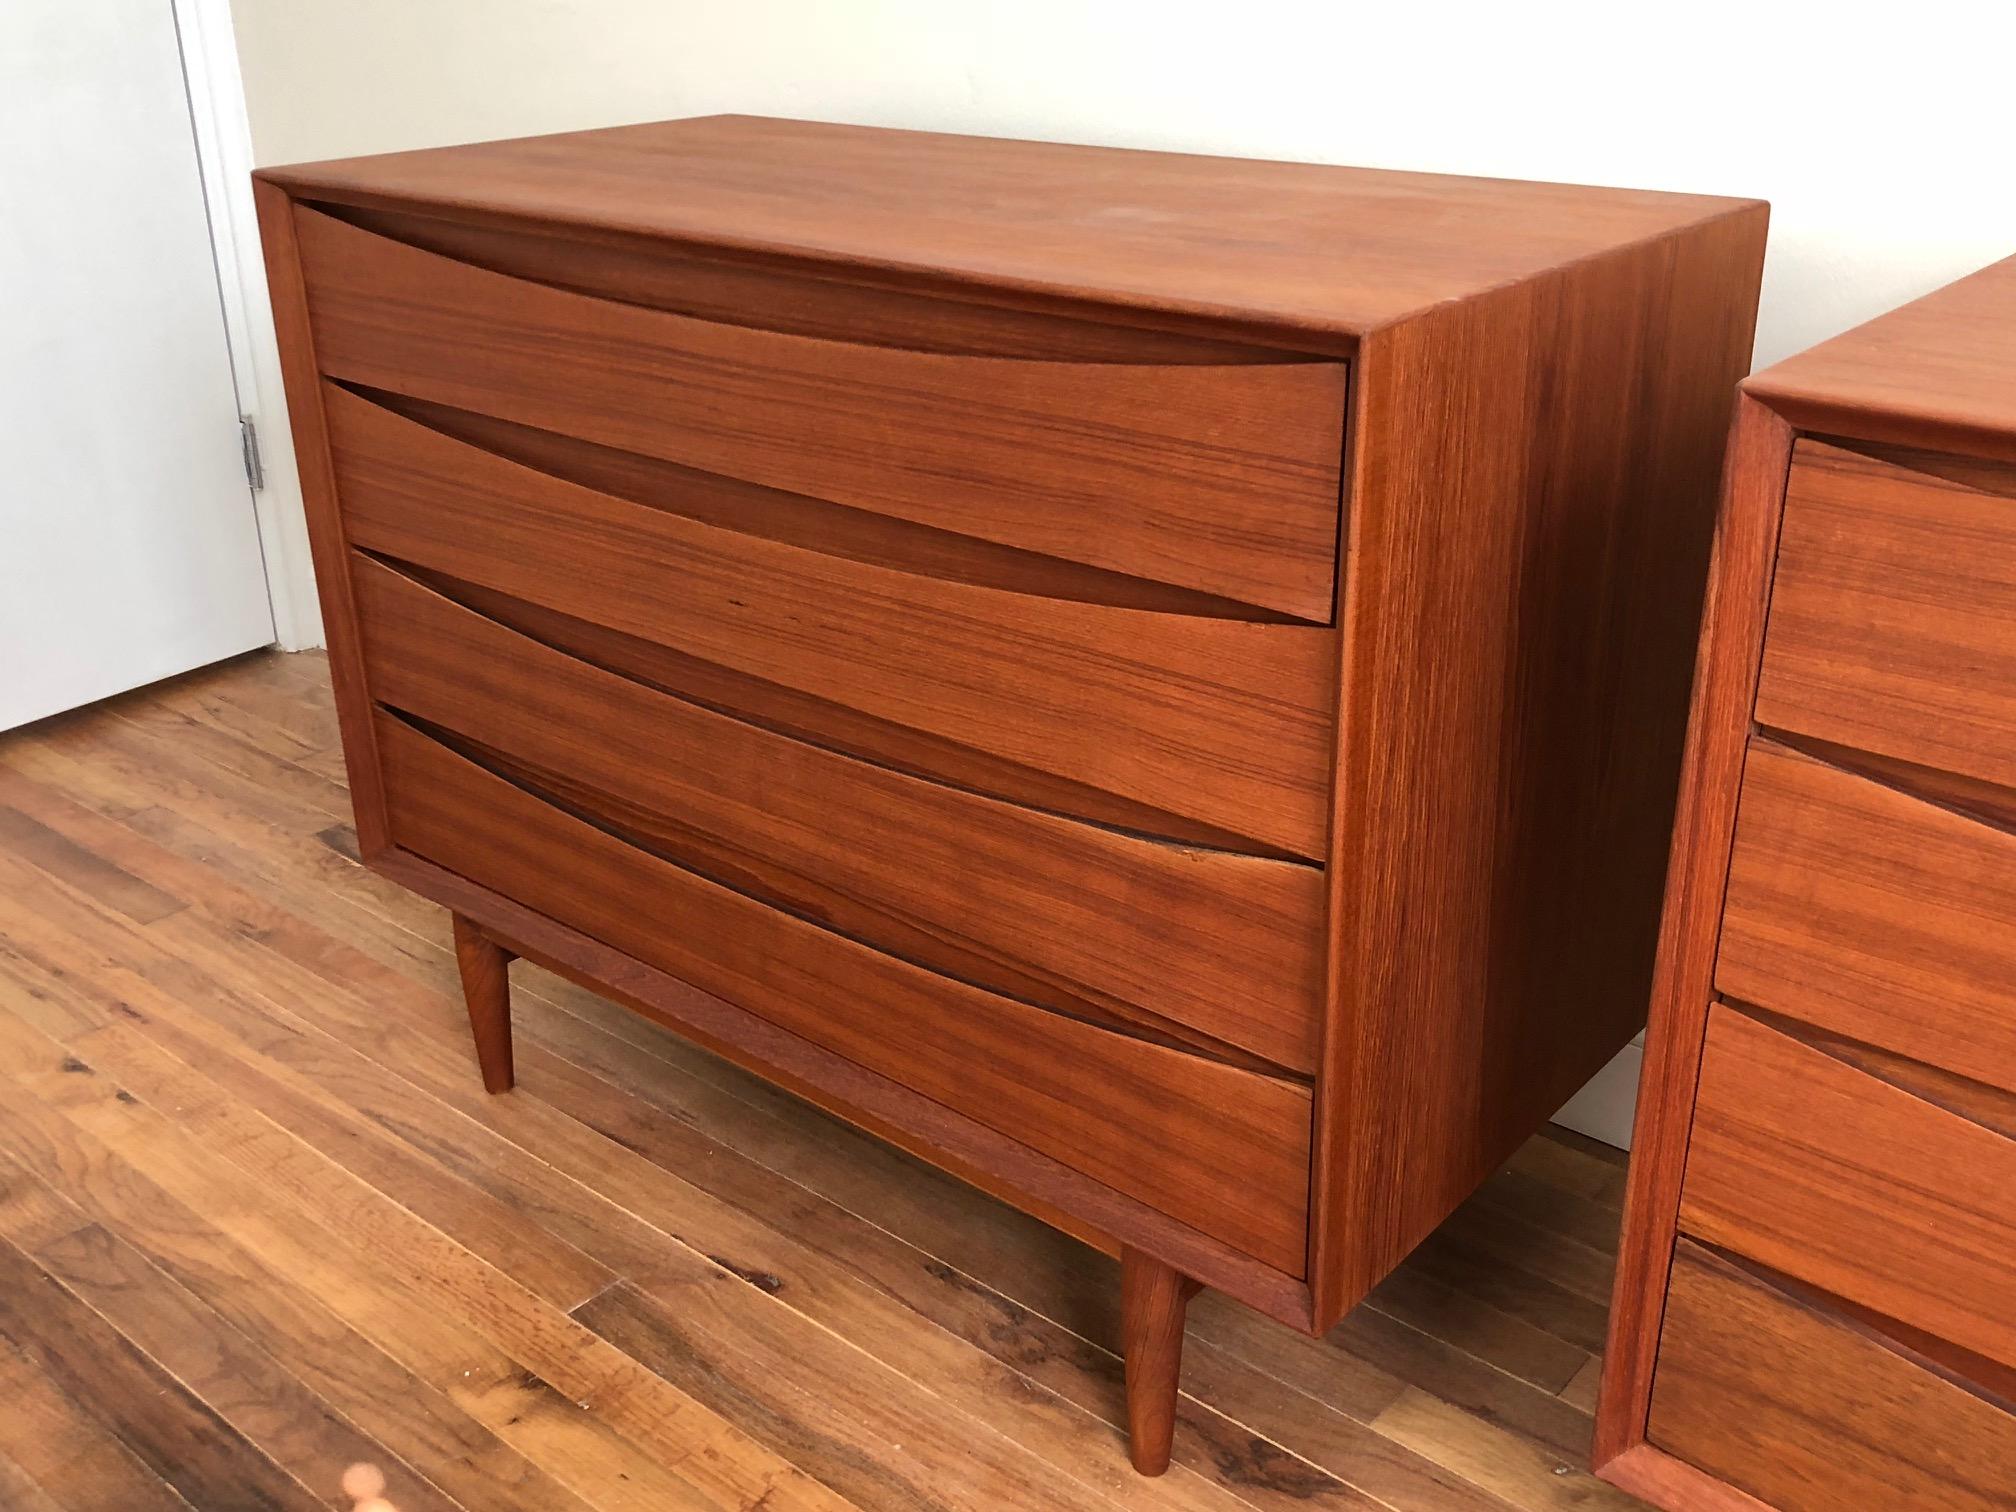 A pair of Classic Arne Vodder/Sibast Danish chests. Constructed of teak with top drawers containing dividers and trays. Each one measures approx. 19.5